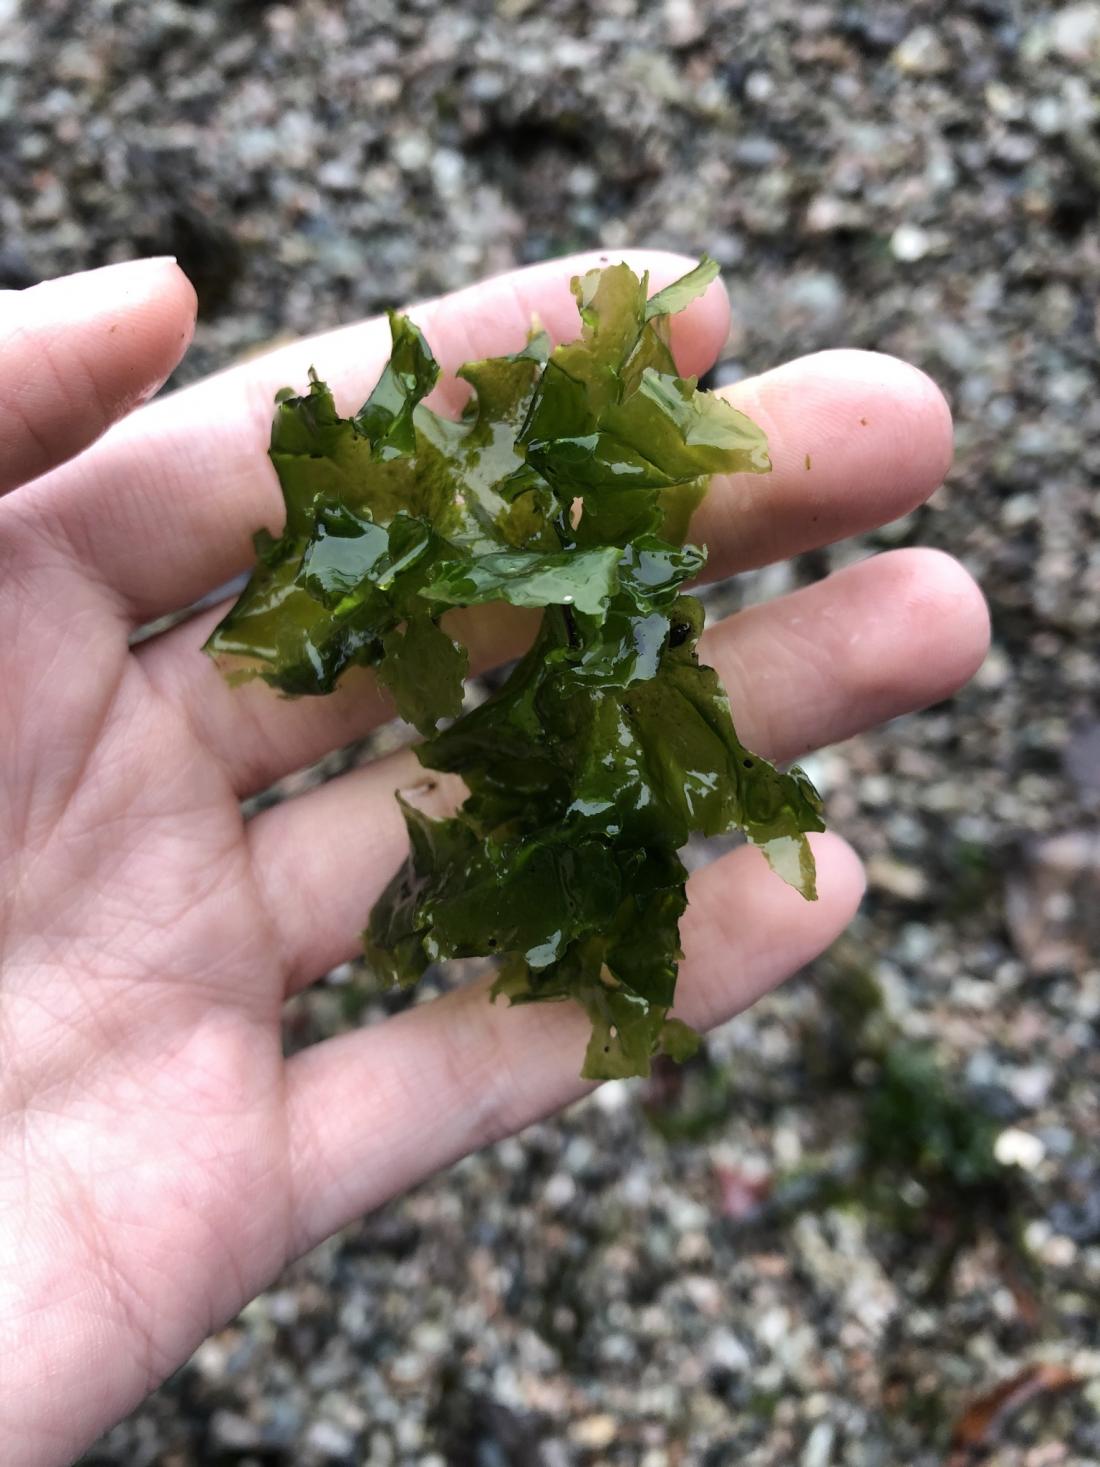 sea lettuce resting on a person's hand with gravel in the background.